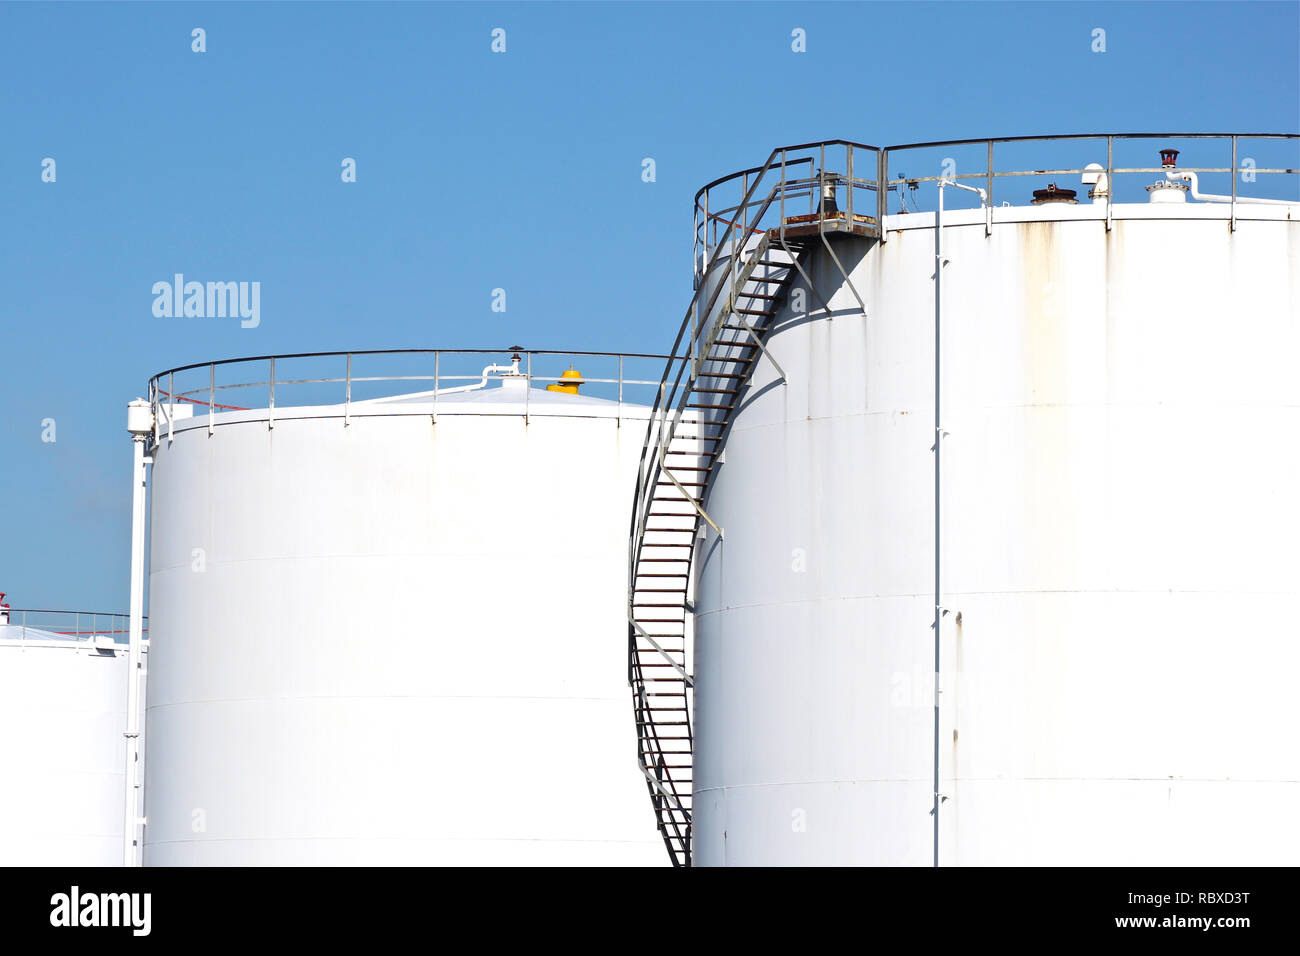 Large white storage tanks for oil and fuel at a refinery. Stock Photo